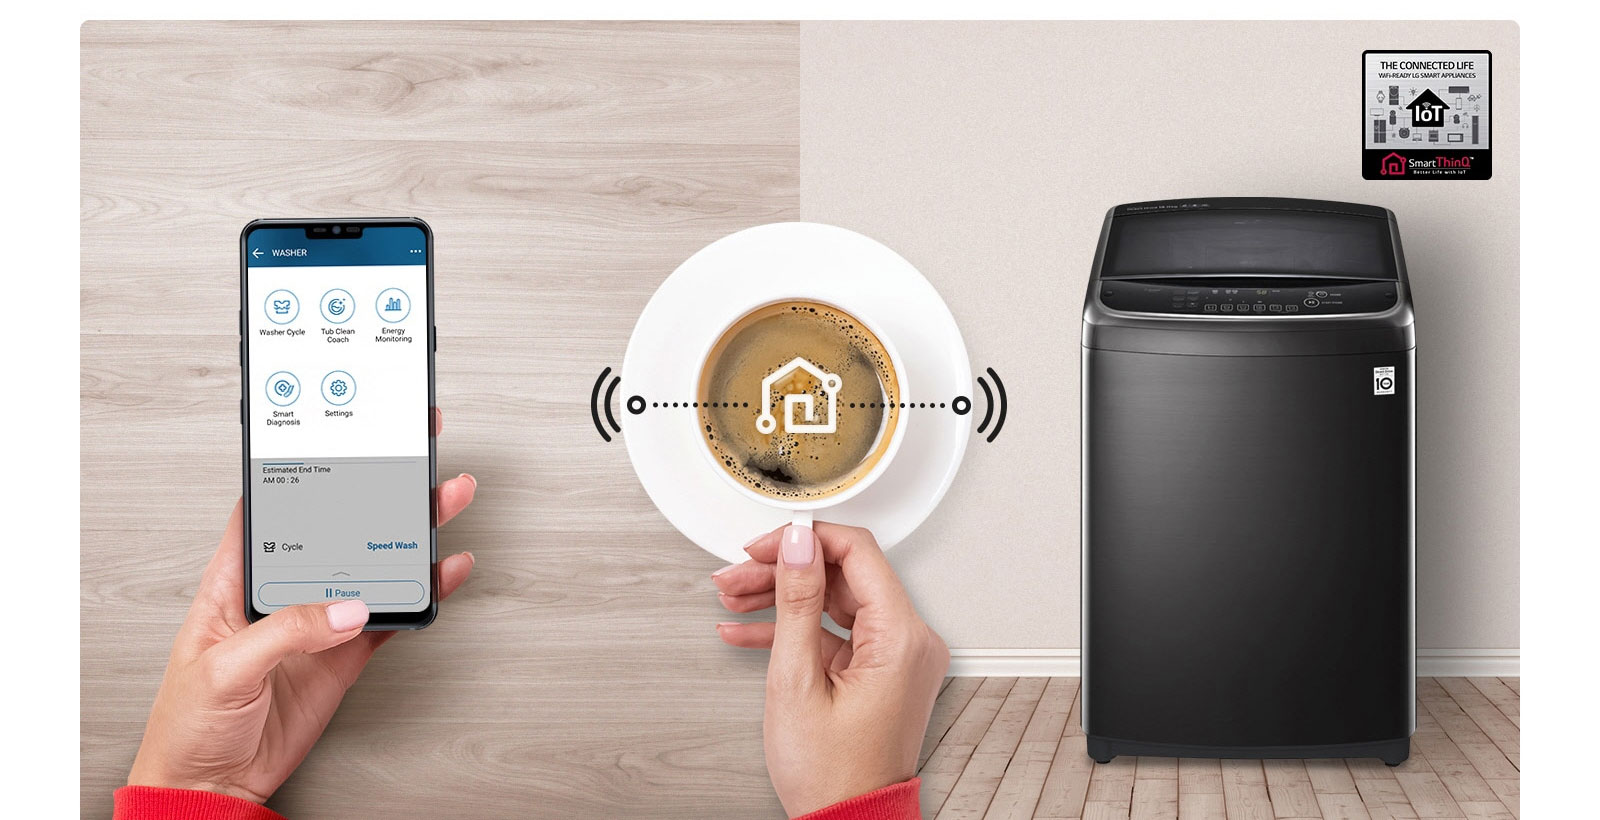 Smart Laundry with Wi-Fi